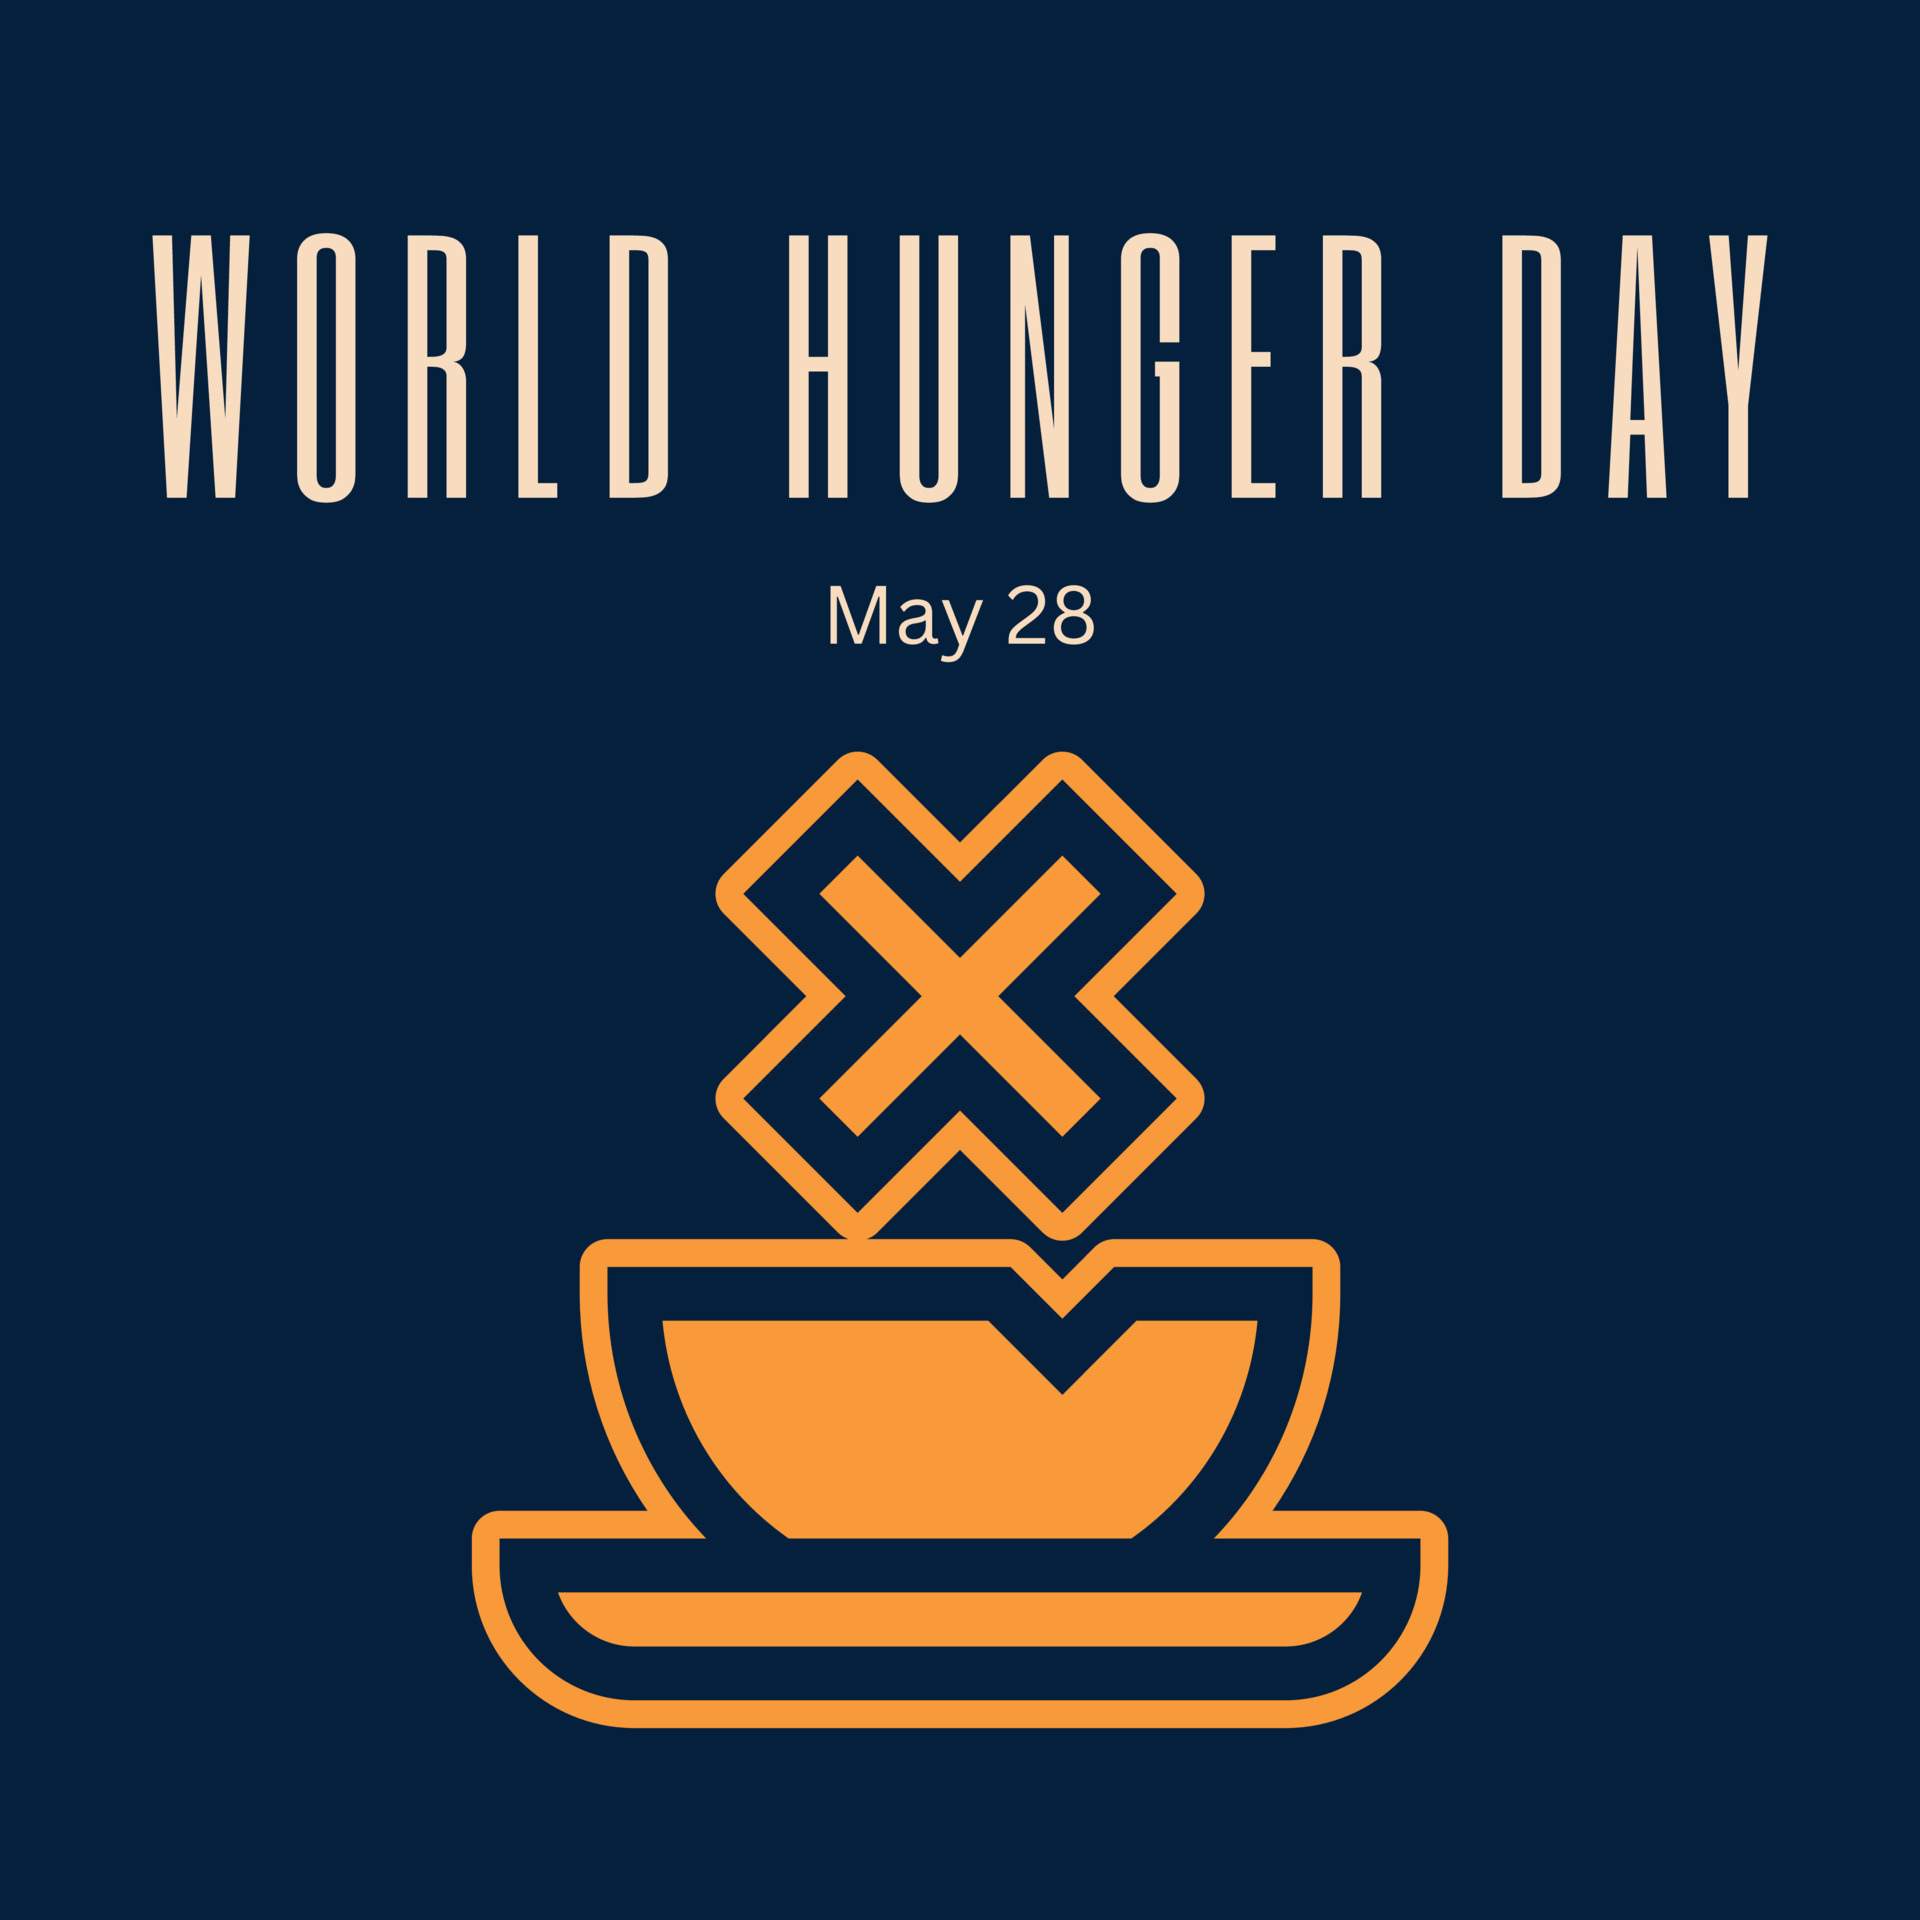 world hunger day poster suitable for social media posts 23291534 Vector